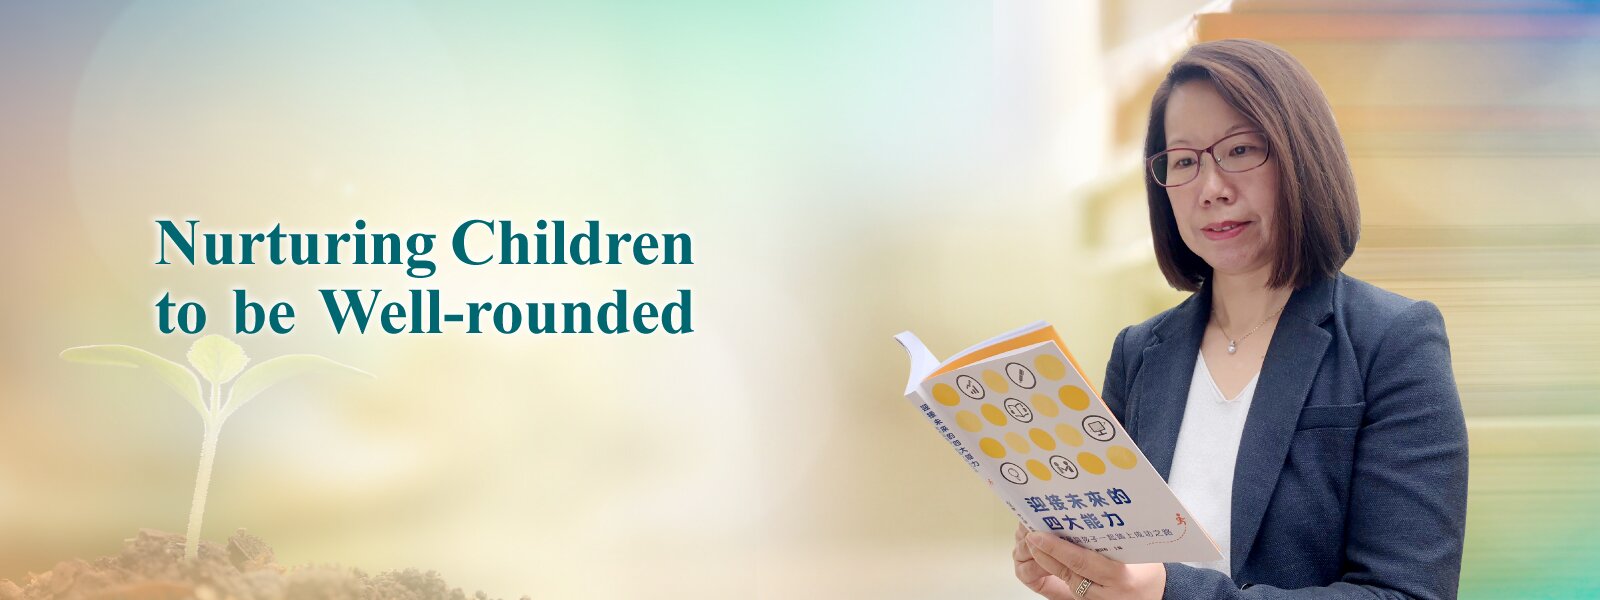 Nurturing Children to be Well-rounded